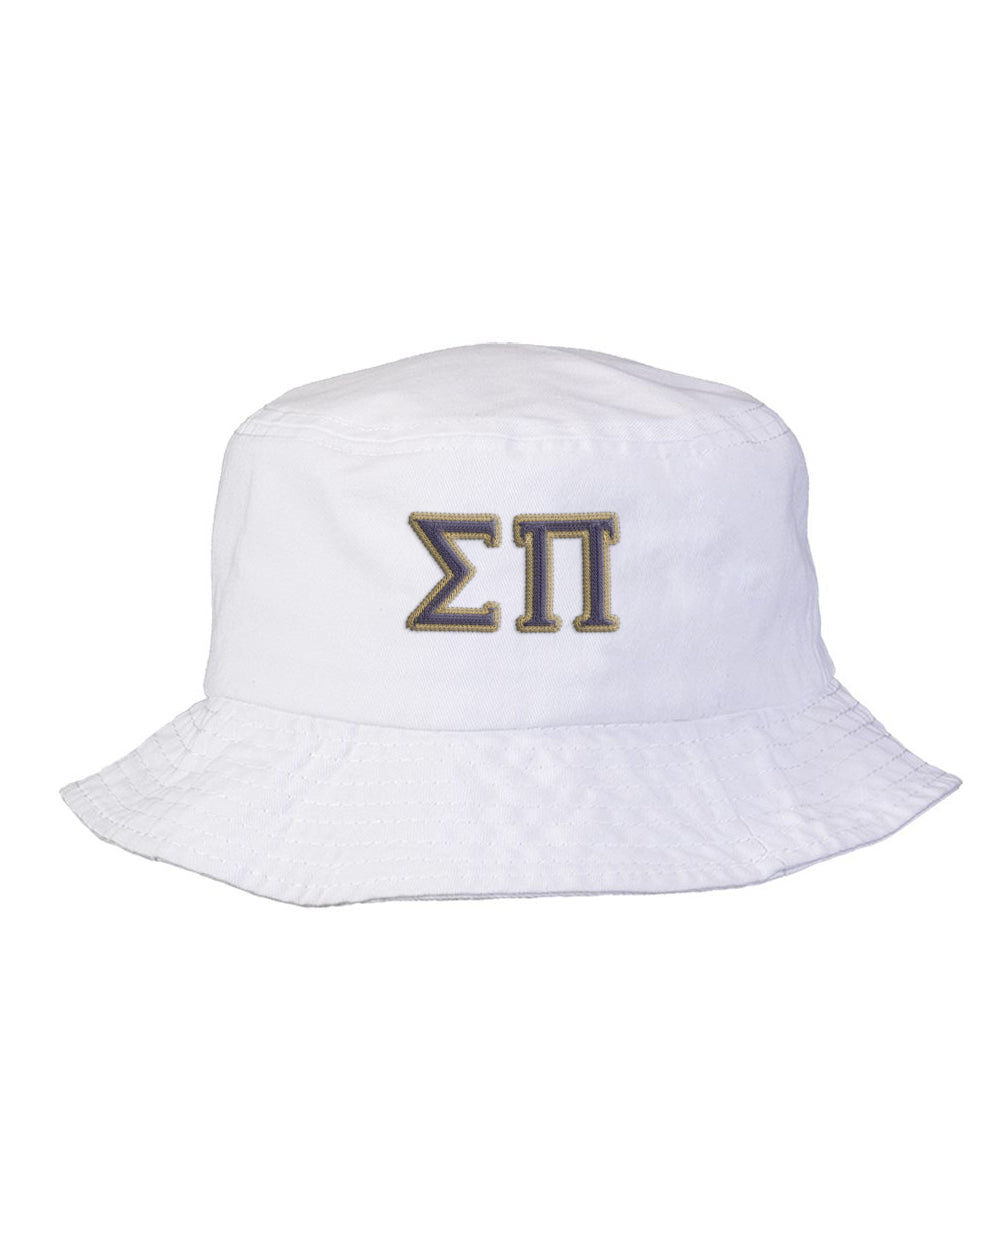 Sigma Pi Embroidered Bucket Hat